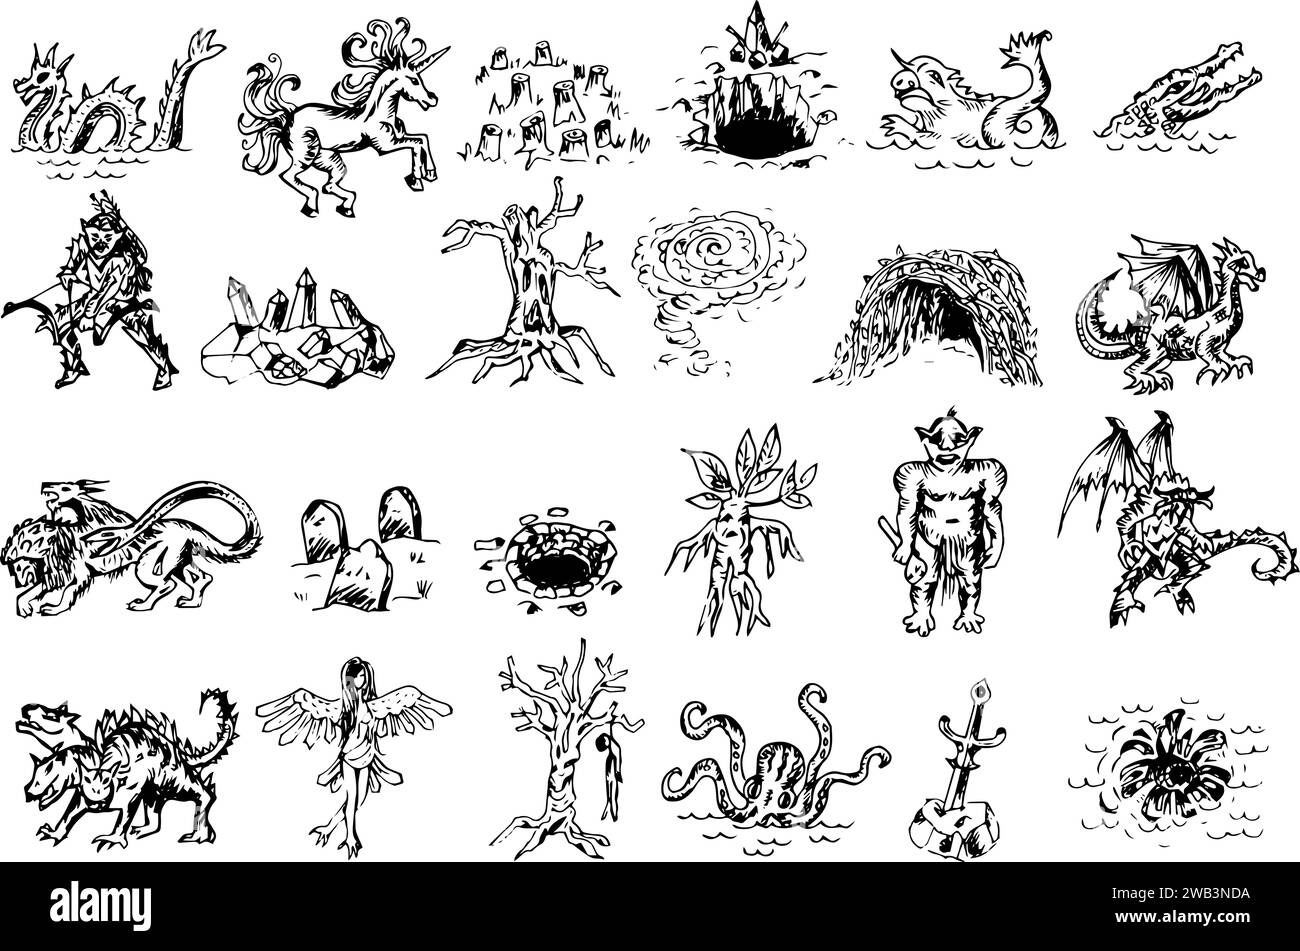 Fantasy map elements of mythical monster symbols, line drawings, vectors Stock Vector